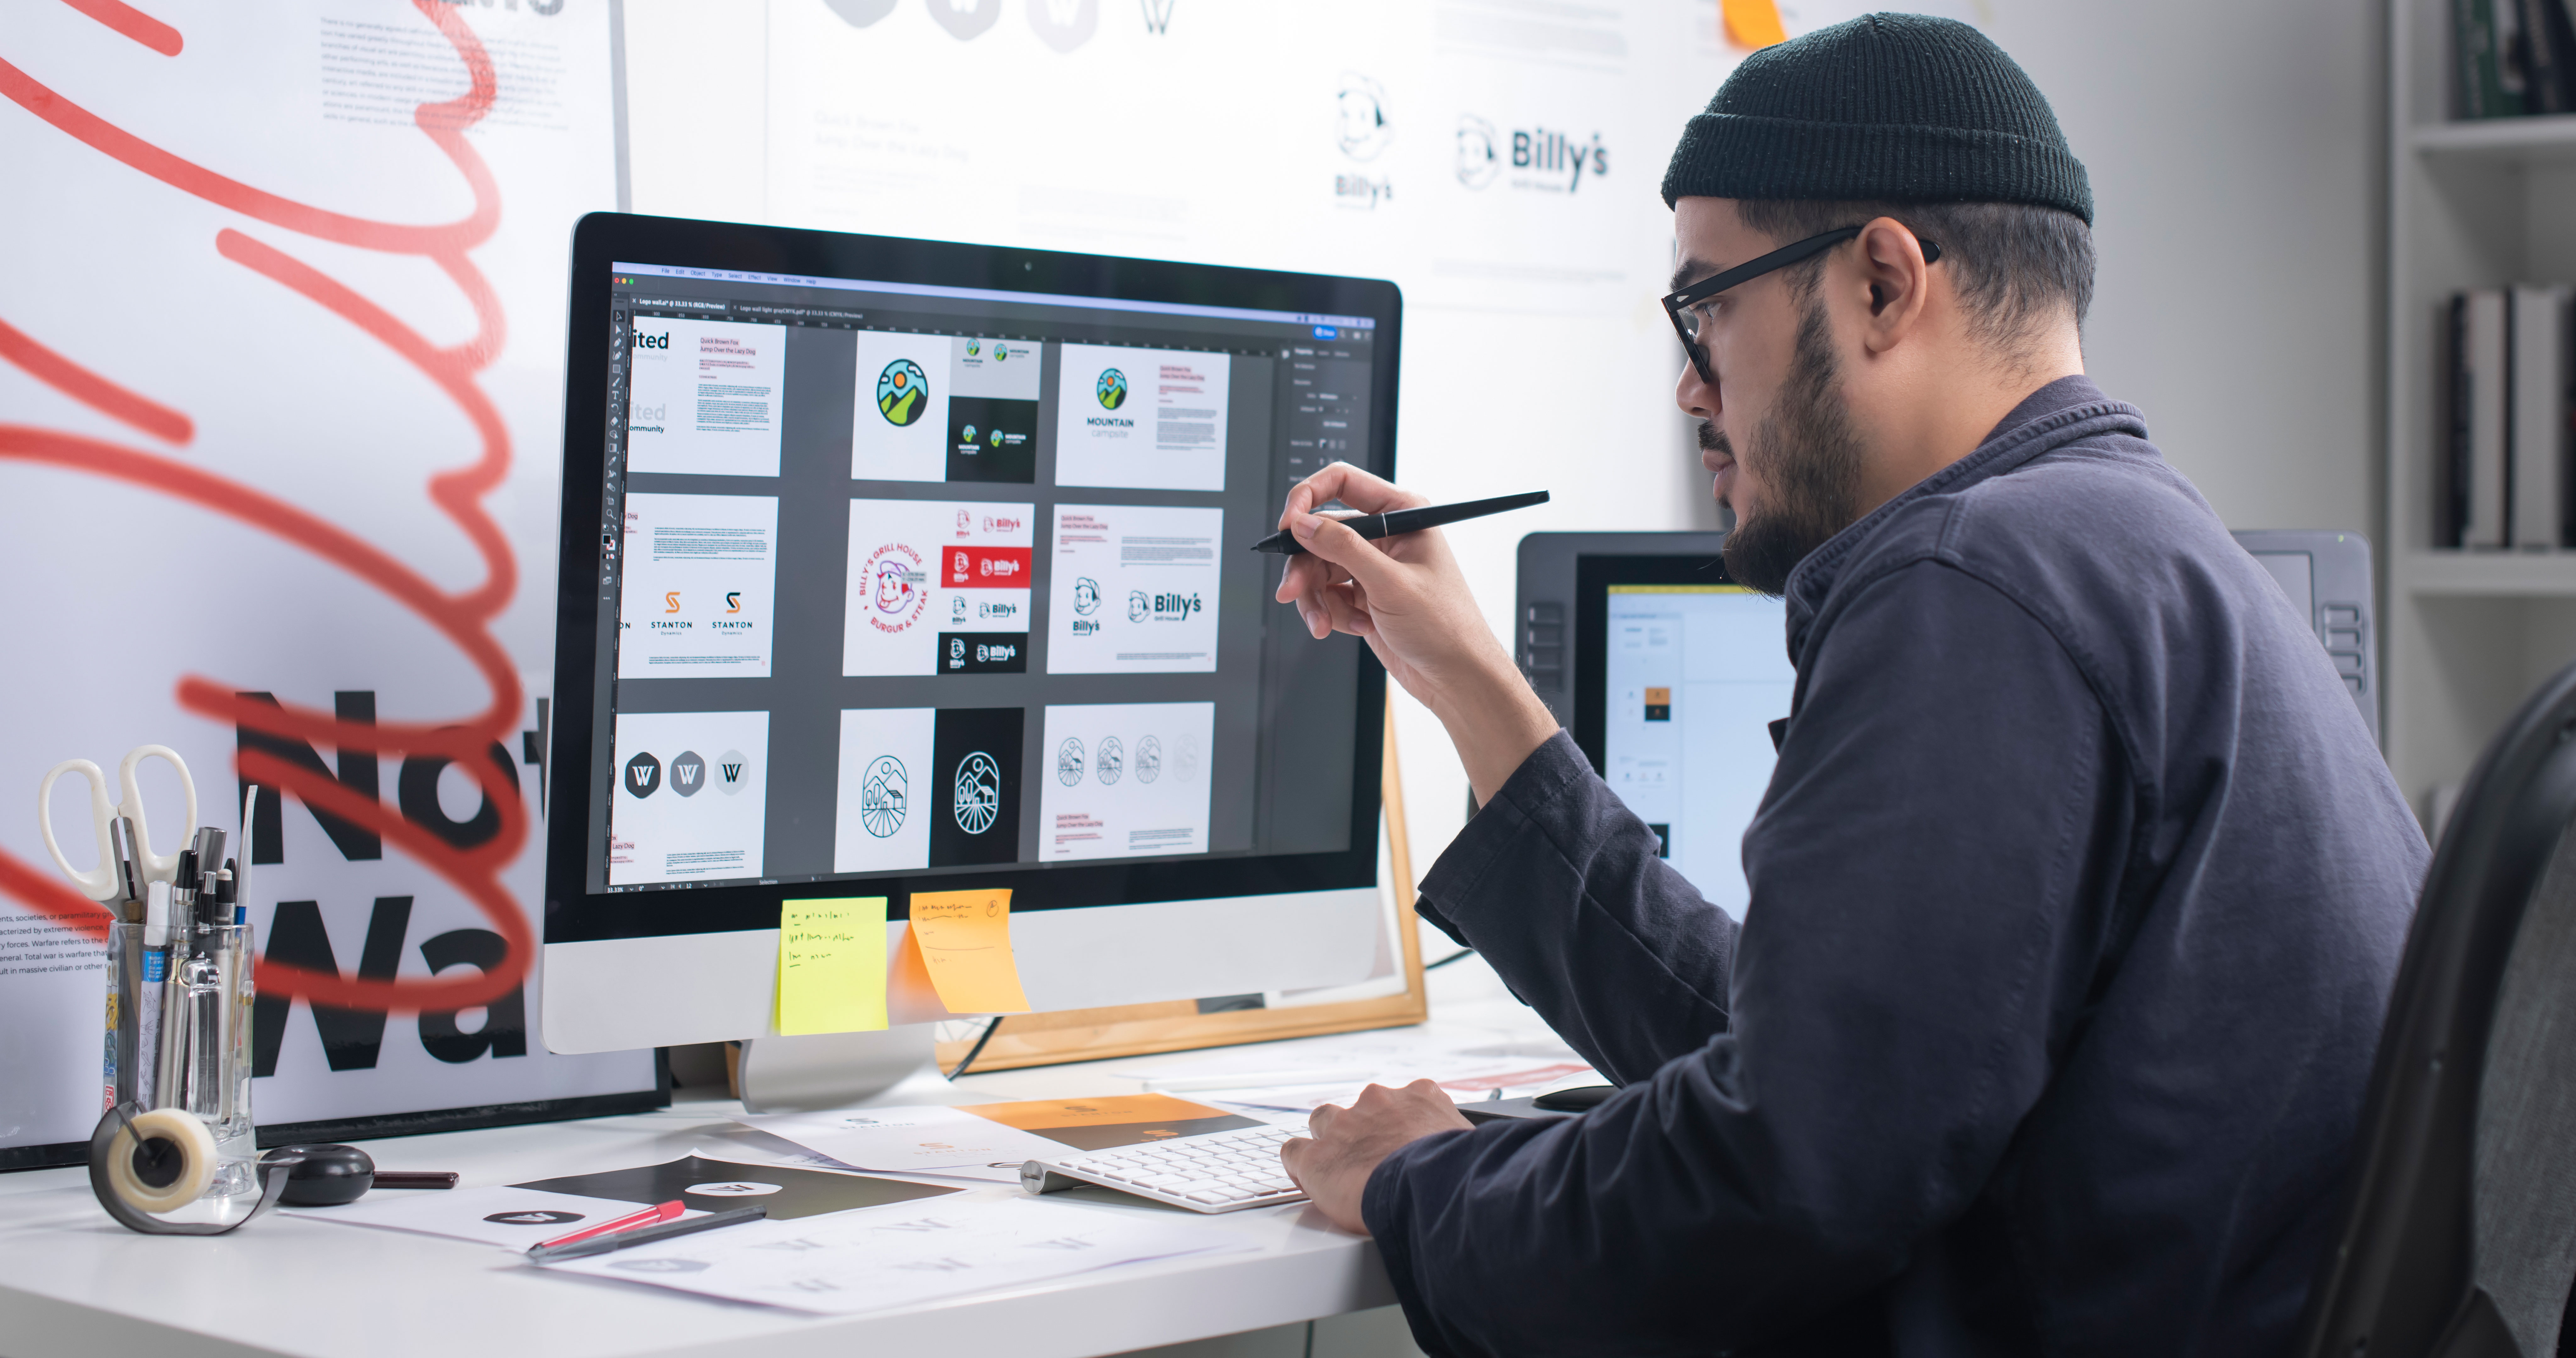 Graphic designer reviewing logos on a big monitor.